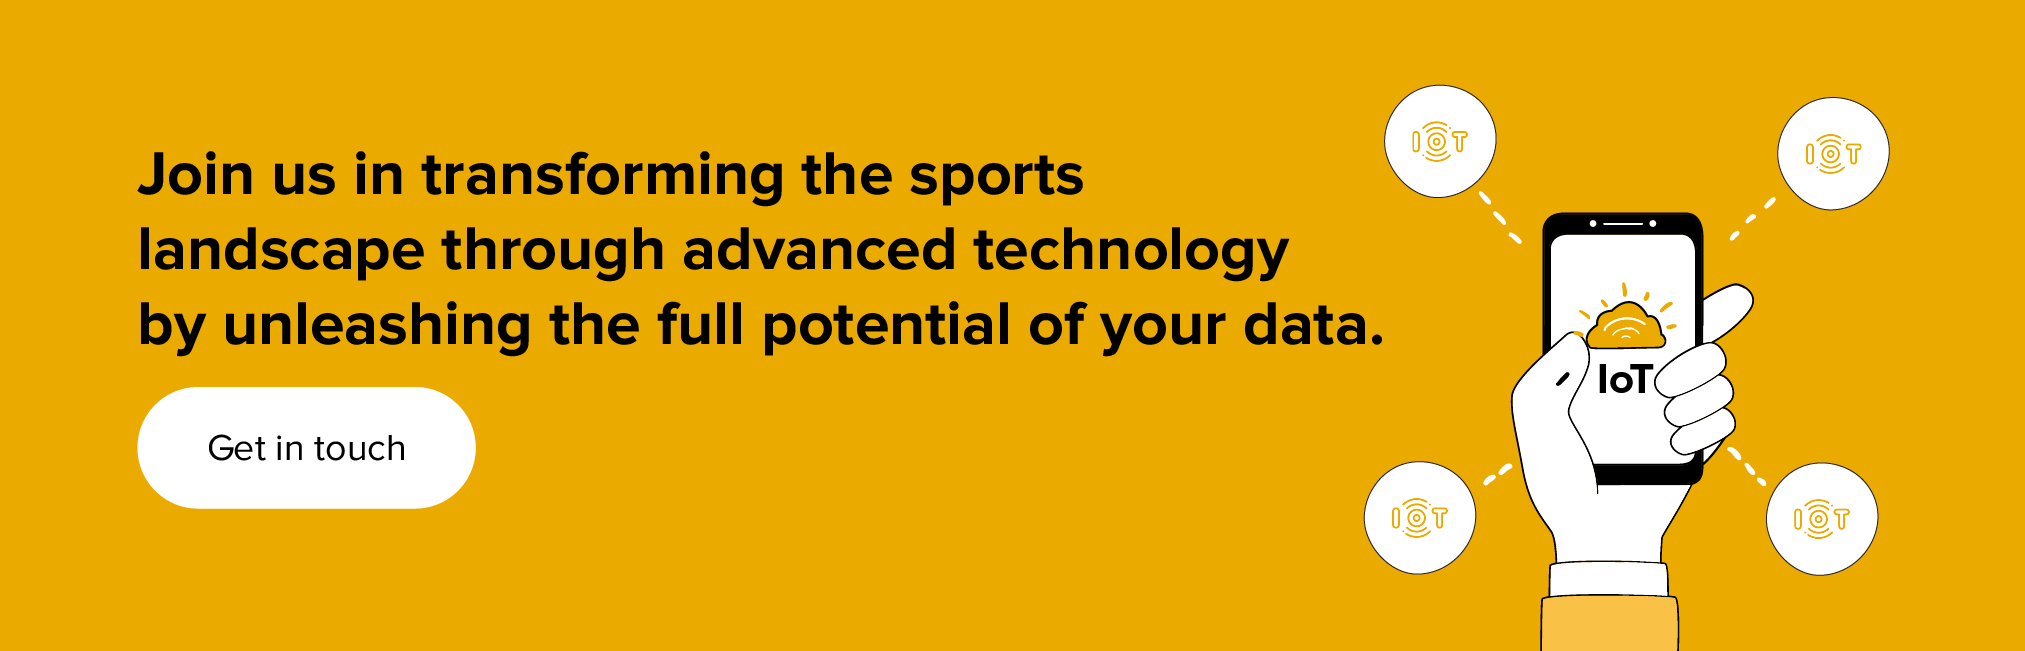 Transforming sports with advanced technology